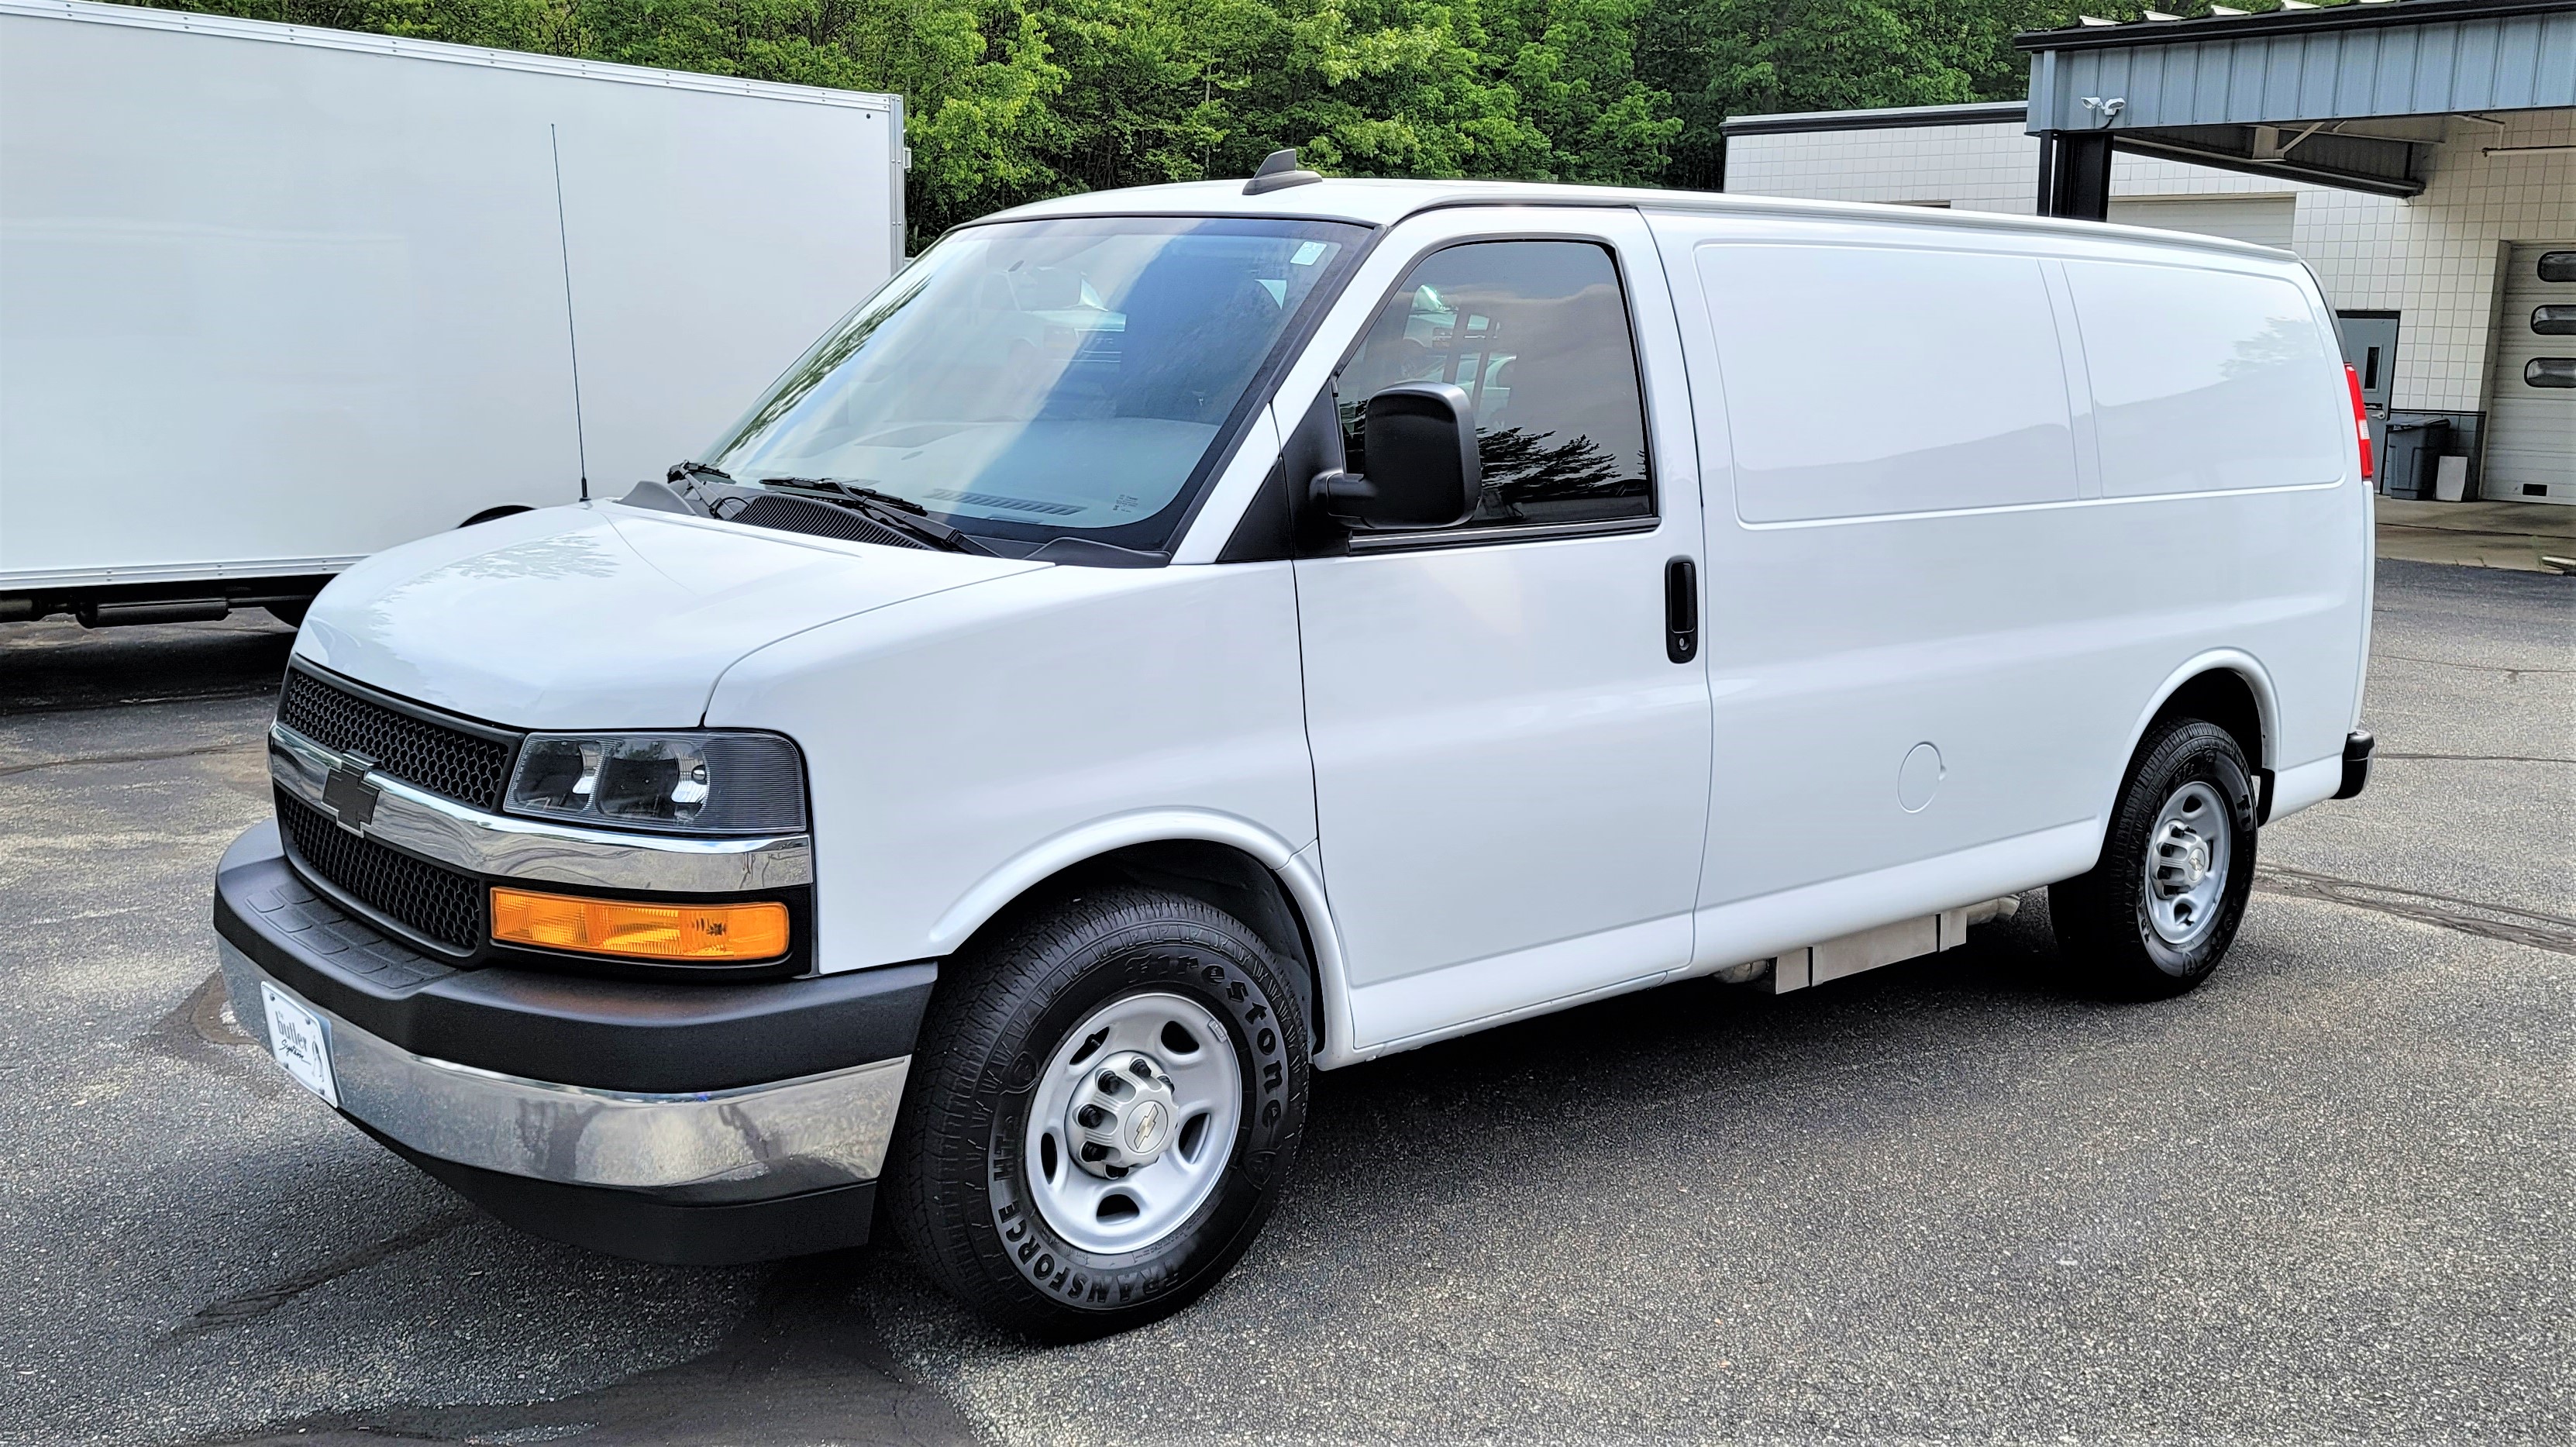 2020 Chevrolet Express, 2500 Series, 8600 GVW, Heavy Duty 3/4 Ton, Regular Length Van, With a " Reconditioned " Butler System Installed